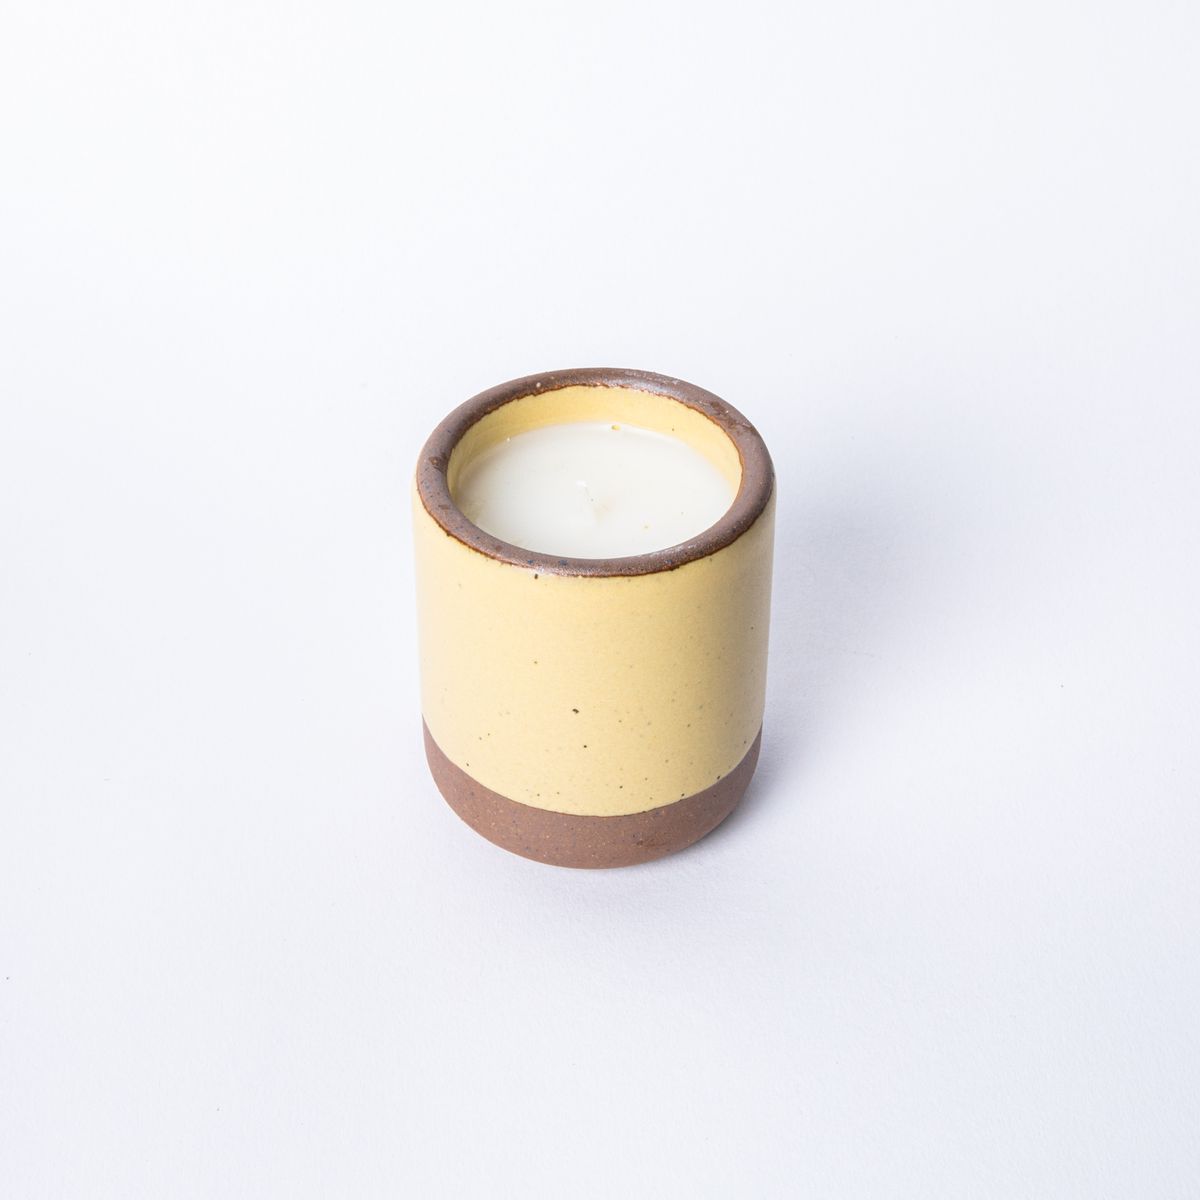 Small ceramic vessel in soft butter yellow color with candle inside